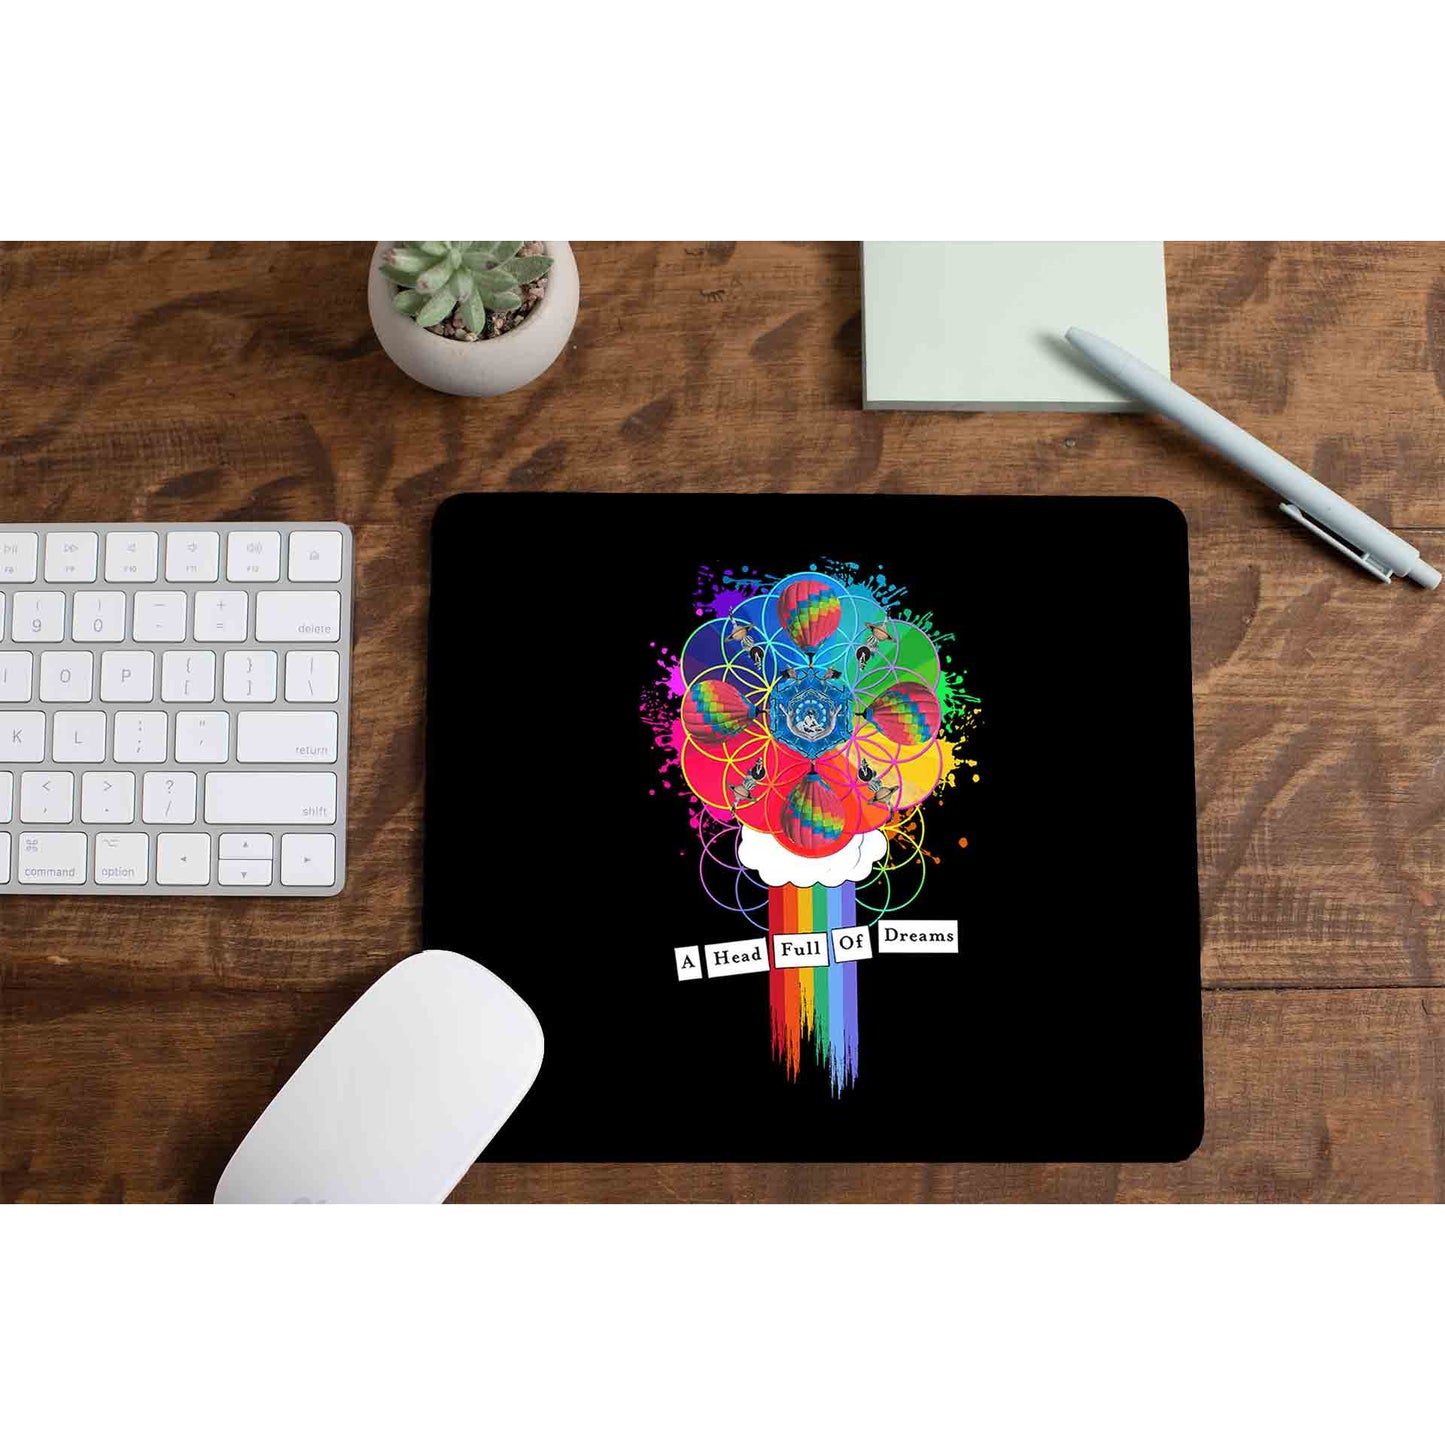 coldplay a head full of dreams mousepad logitech large anime music band buy online united states of america usa the banyan tee tbt men women girls boys unisex